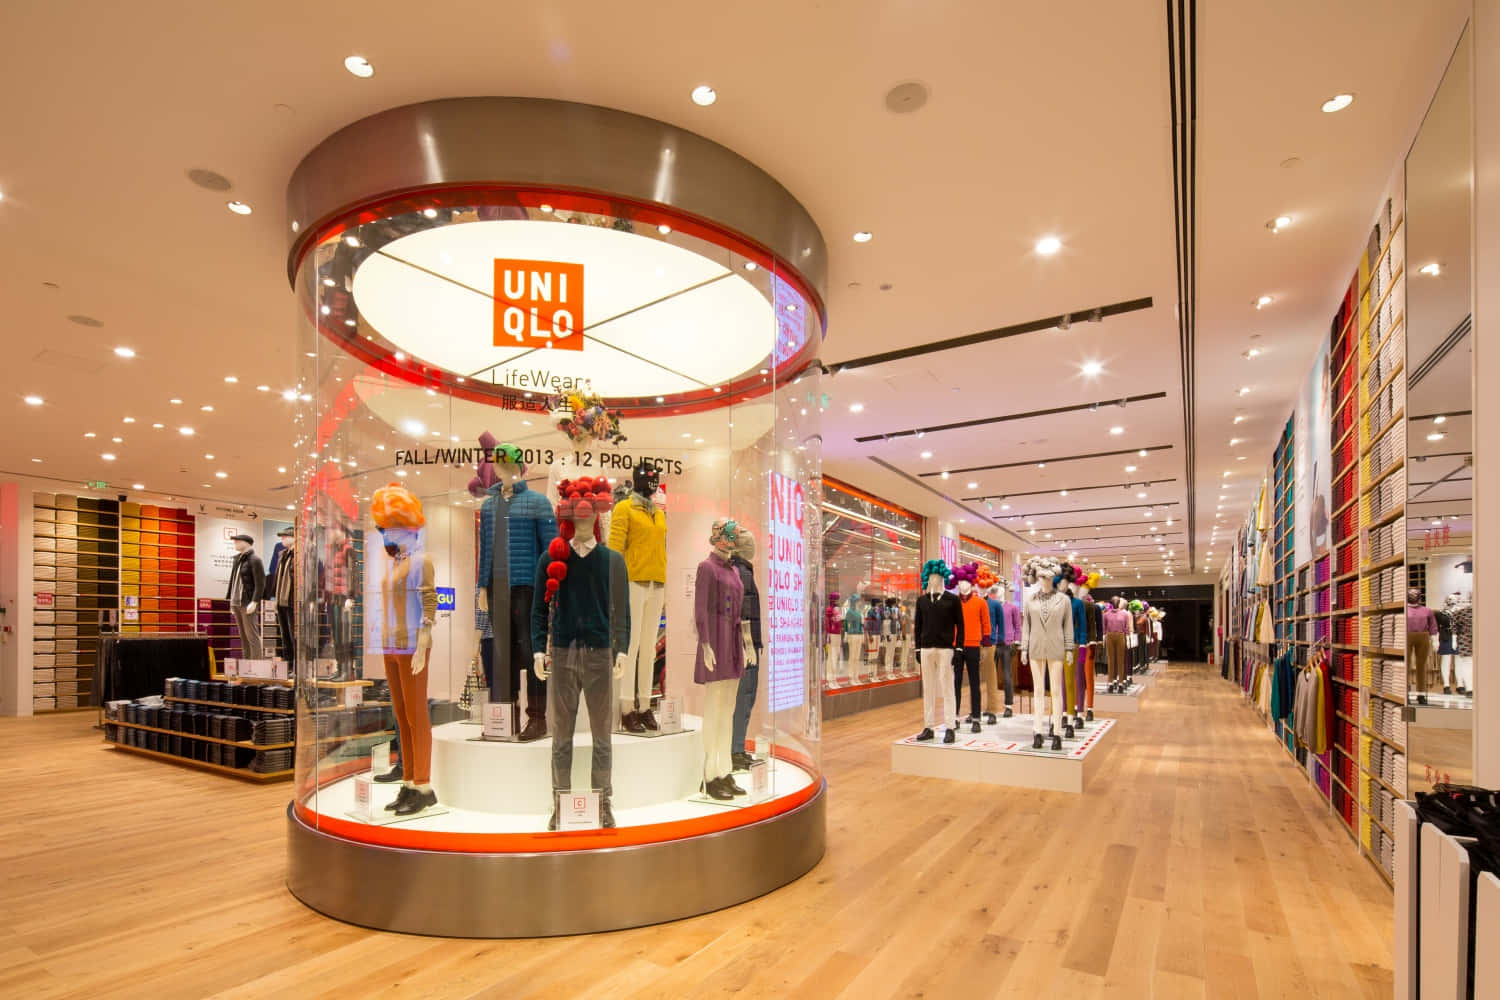 Uniqlo: A store for stylish and affordable clothing